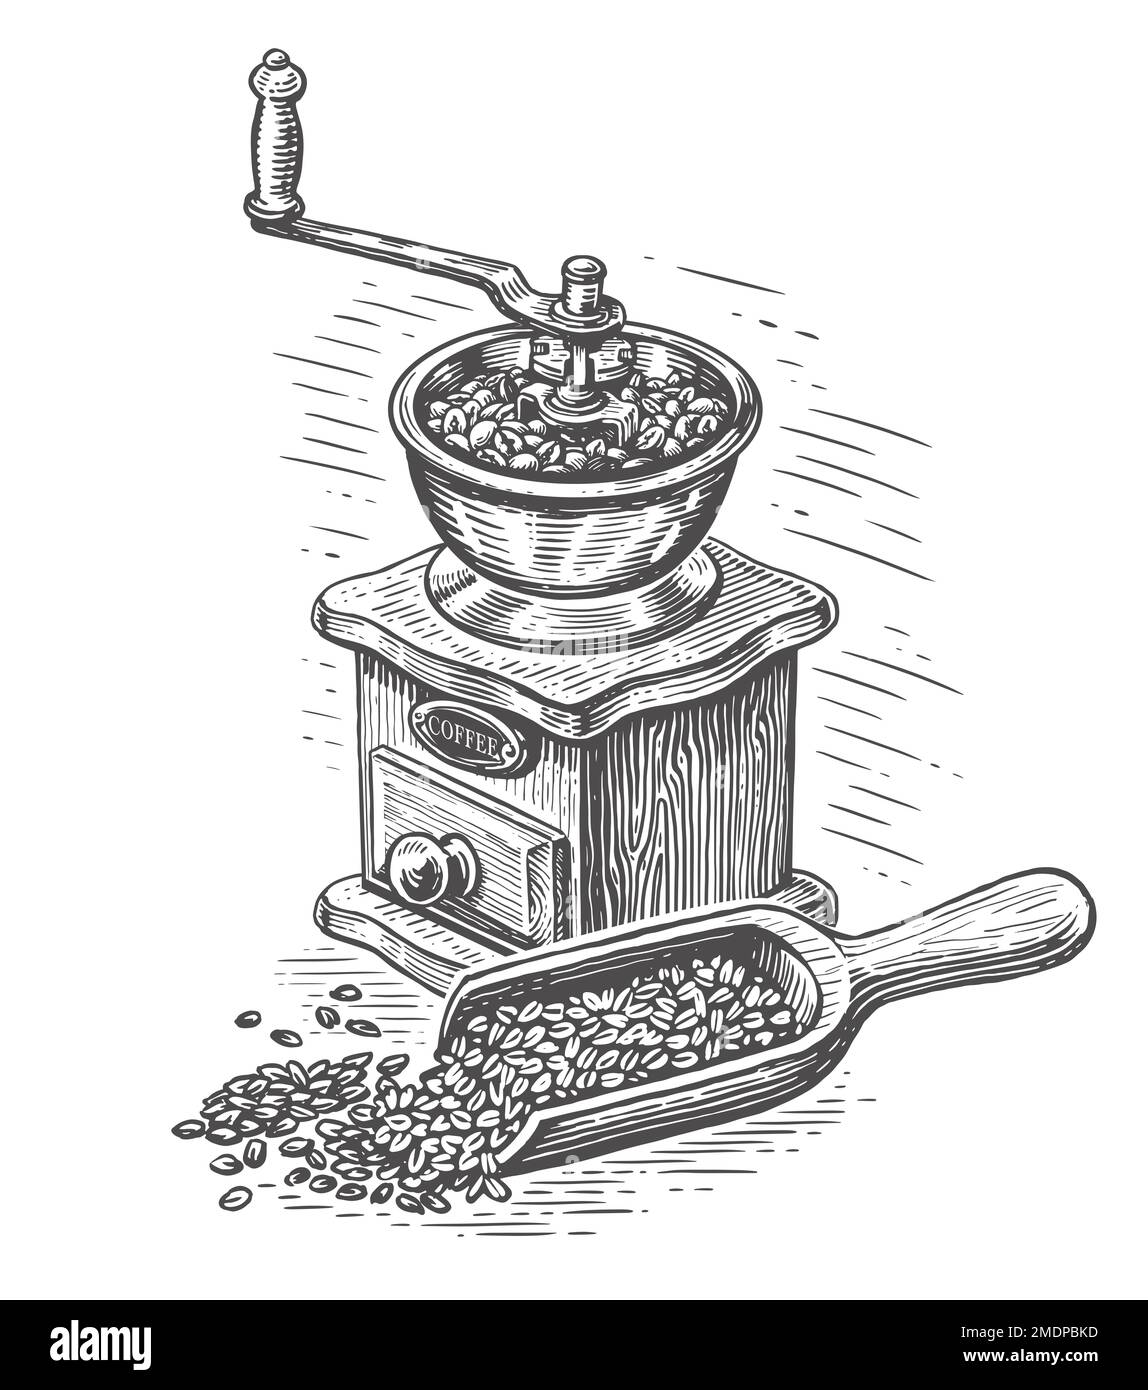 Hand drawn retro coffee grinder with coffee beans. Vintage sketch illustration for cafe menu or coffee shop  Stock Photo